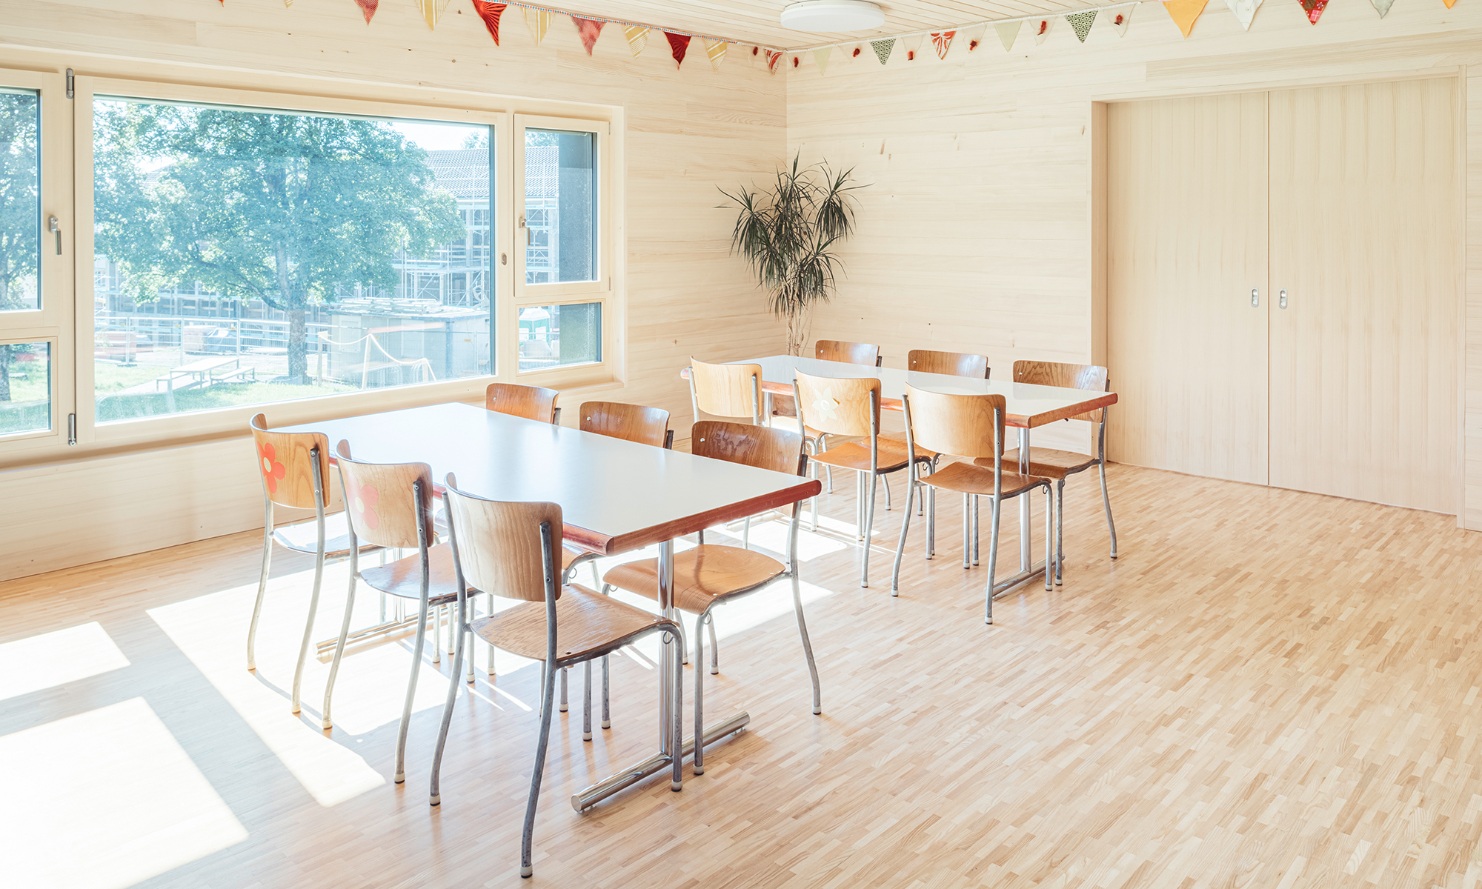 Dining room of the new daycare building. The floor, walls and ceiling of this room are all made of wood, with the large side windows ensuring plenty of daylight.